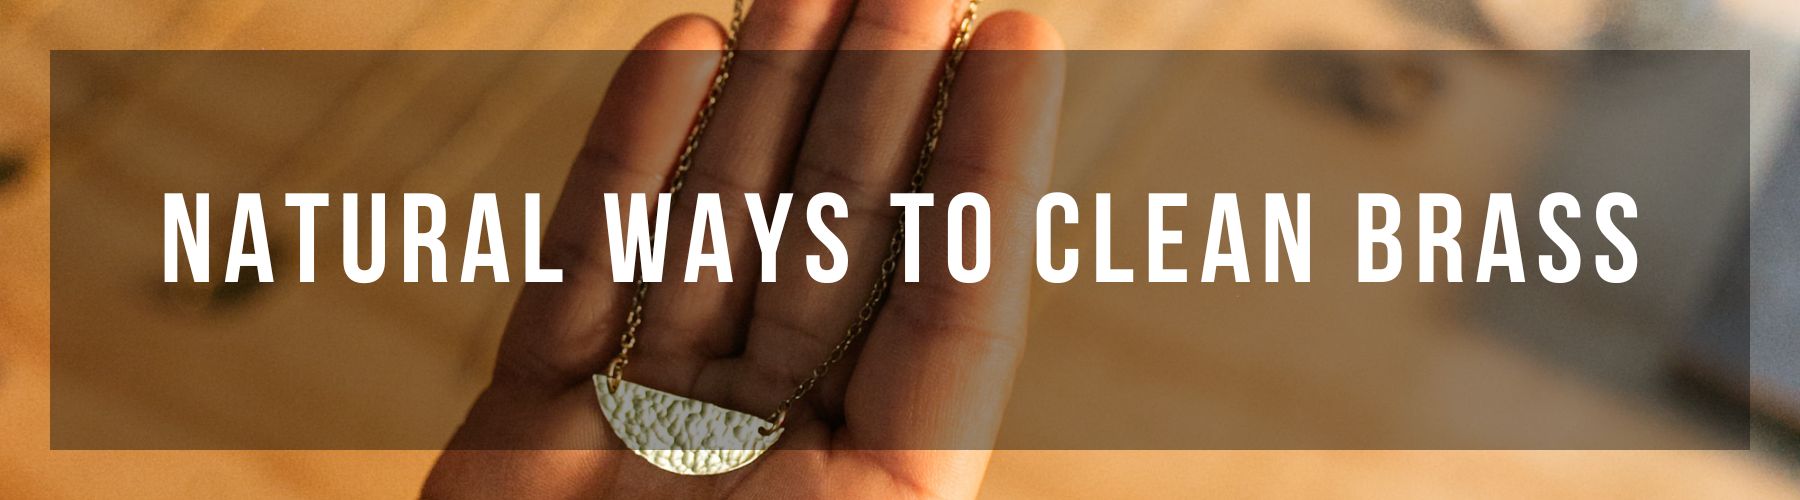 How to Clean Brass Naturally  Cleaning hacks, How to clean brass